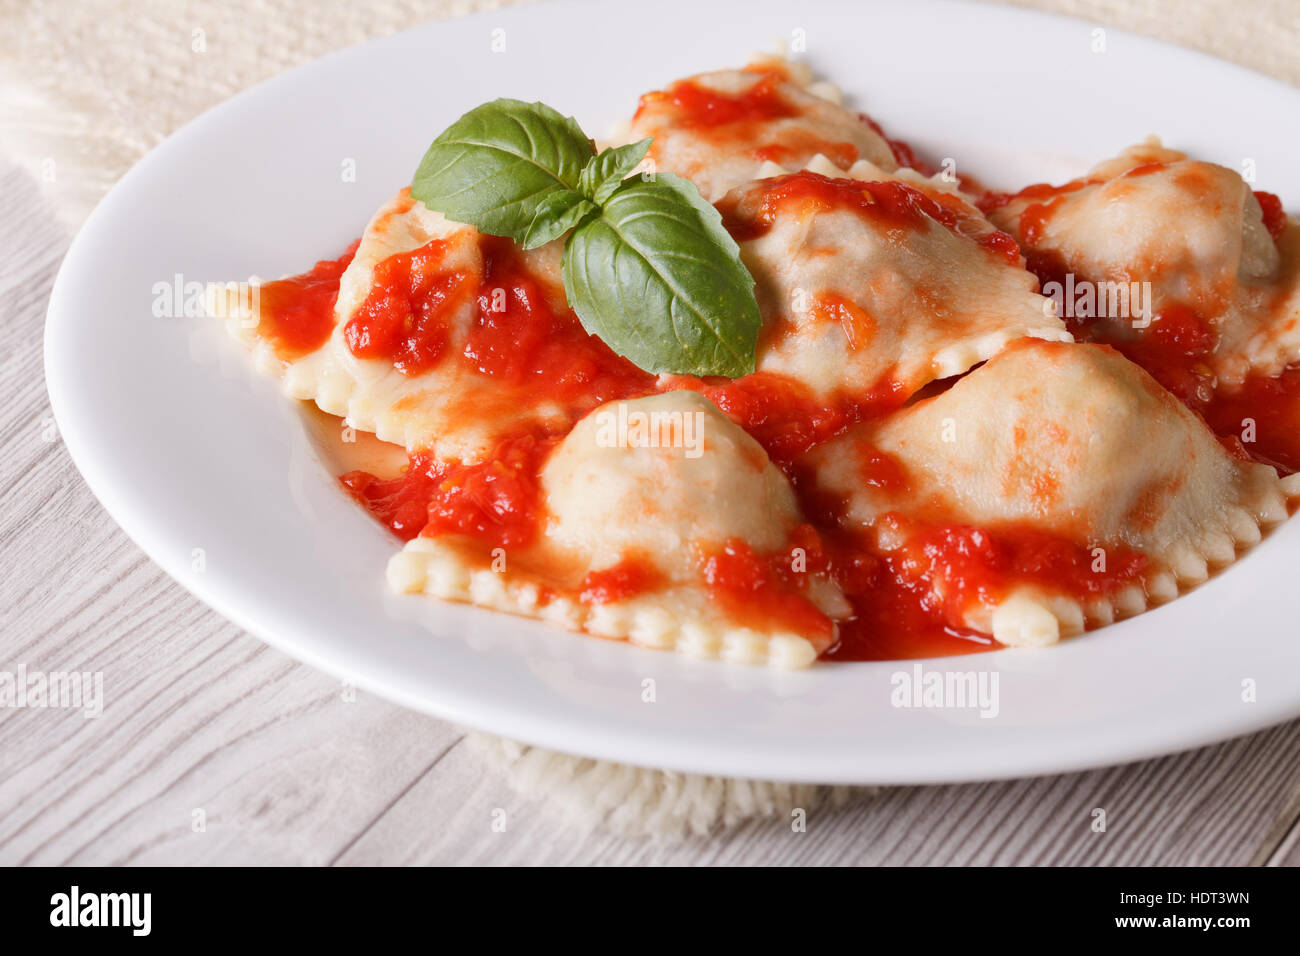 Ravioli stuffed with meat in tomato sauce on a plate close-up. horizontal Stock Photo